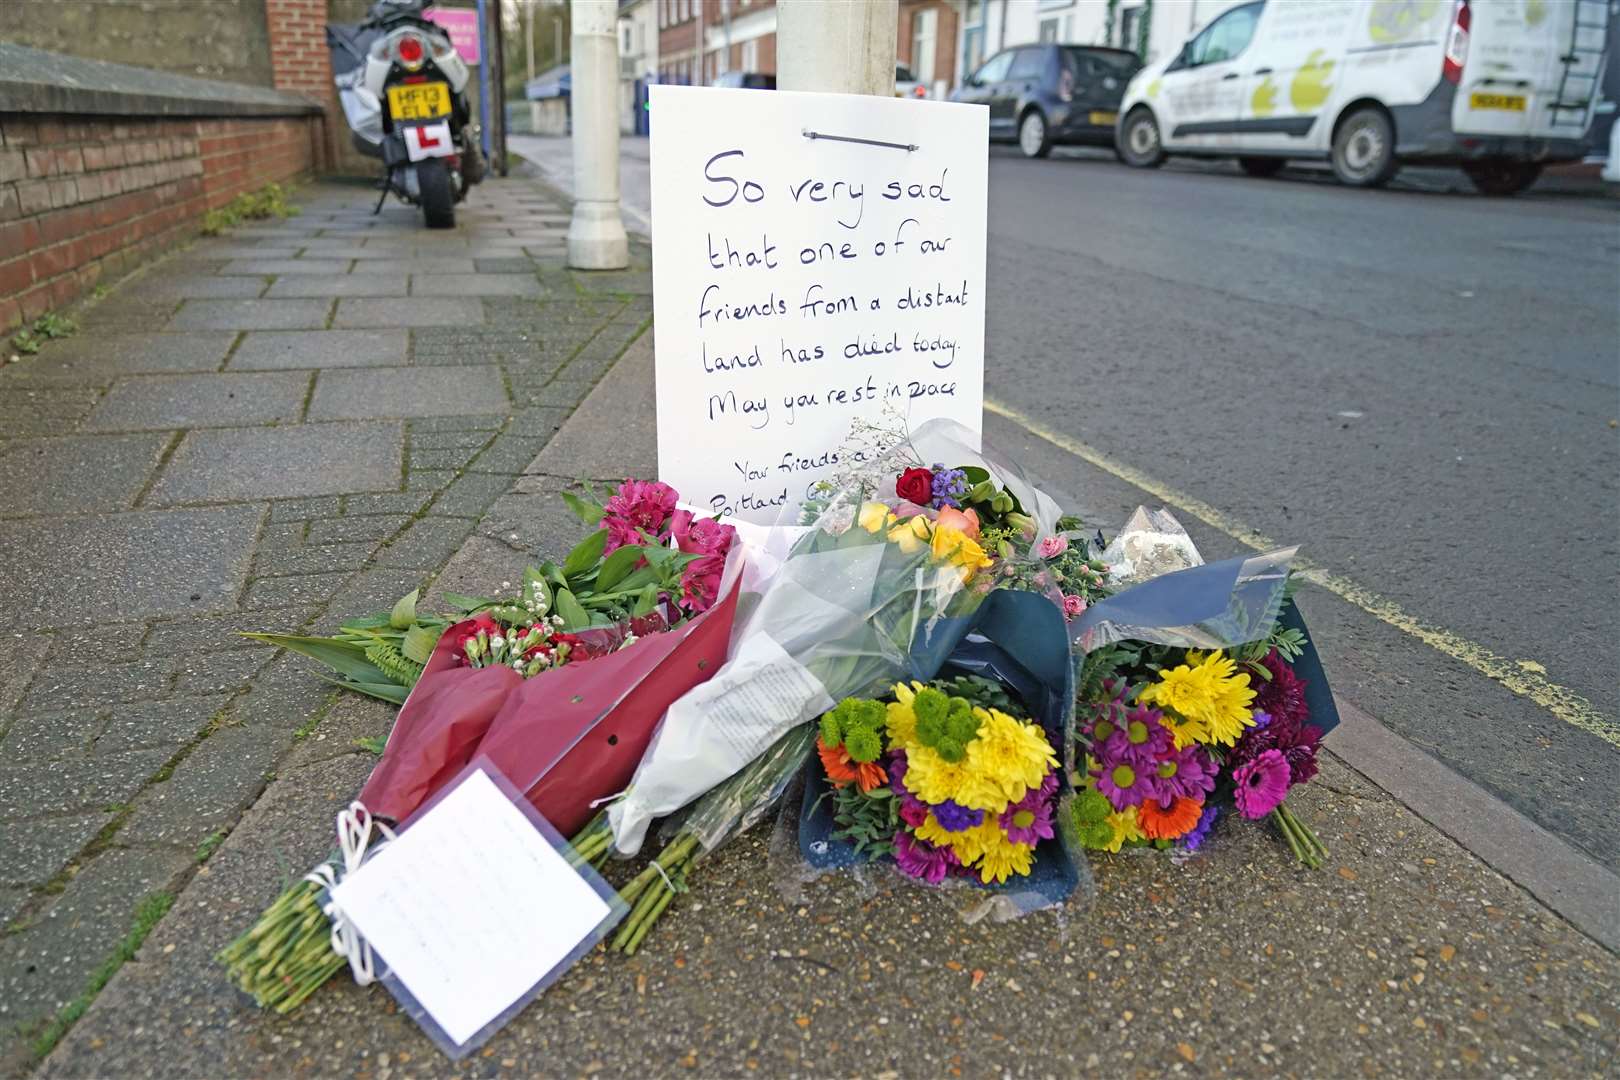 Flowers were left at the entrance at Portland Port in Dorset, following the death of the asylum seeker aboard the barge last month (Andrew Matthews/PA)